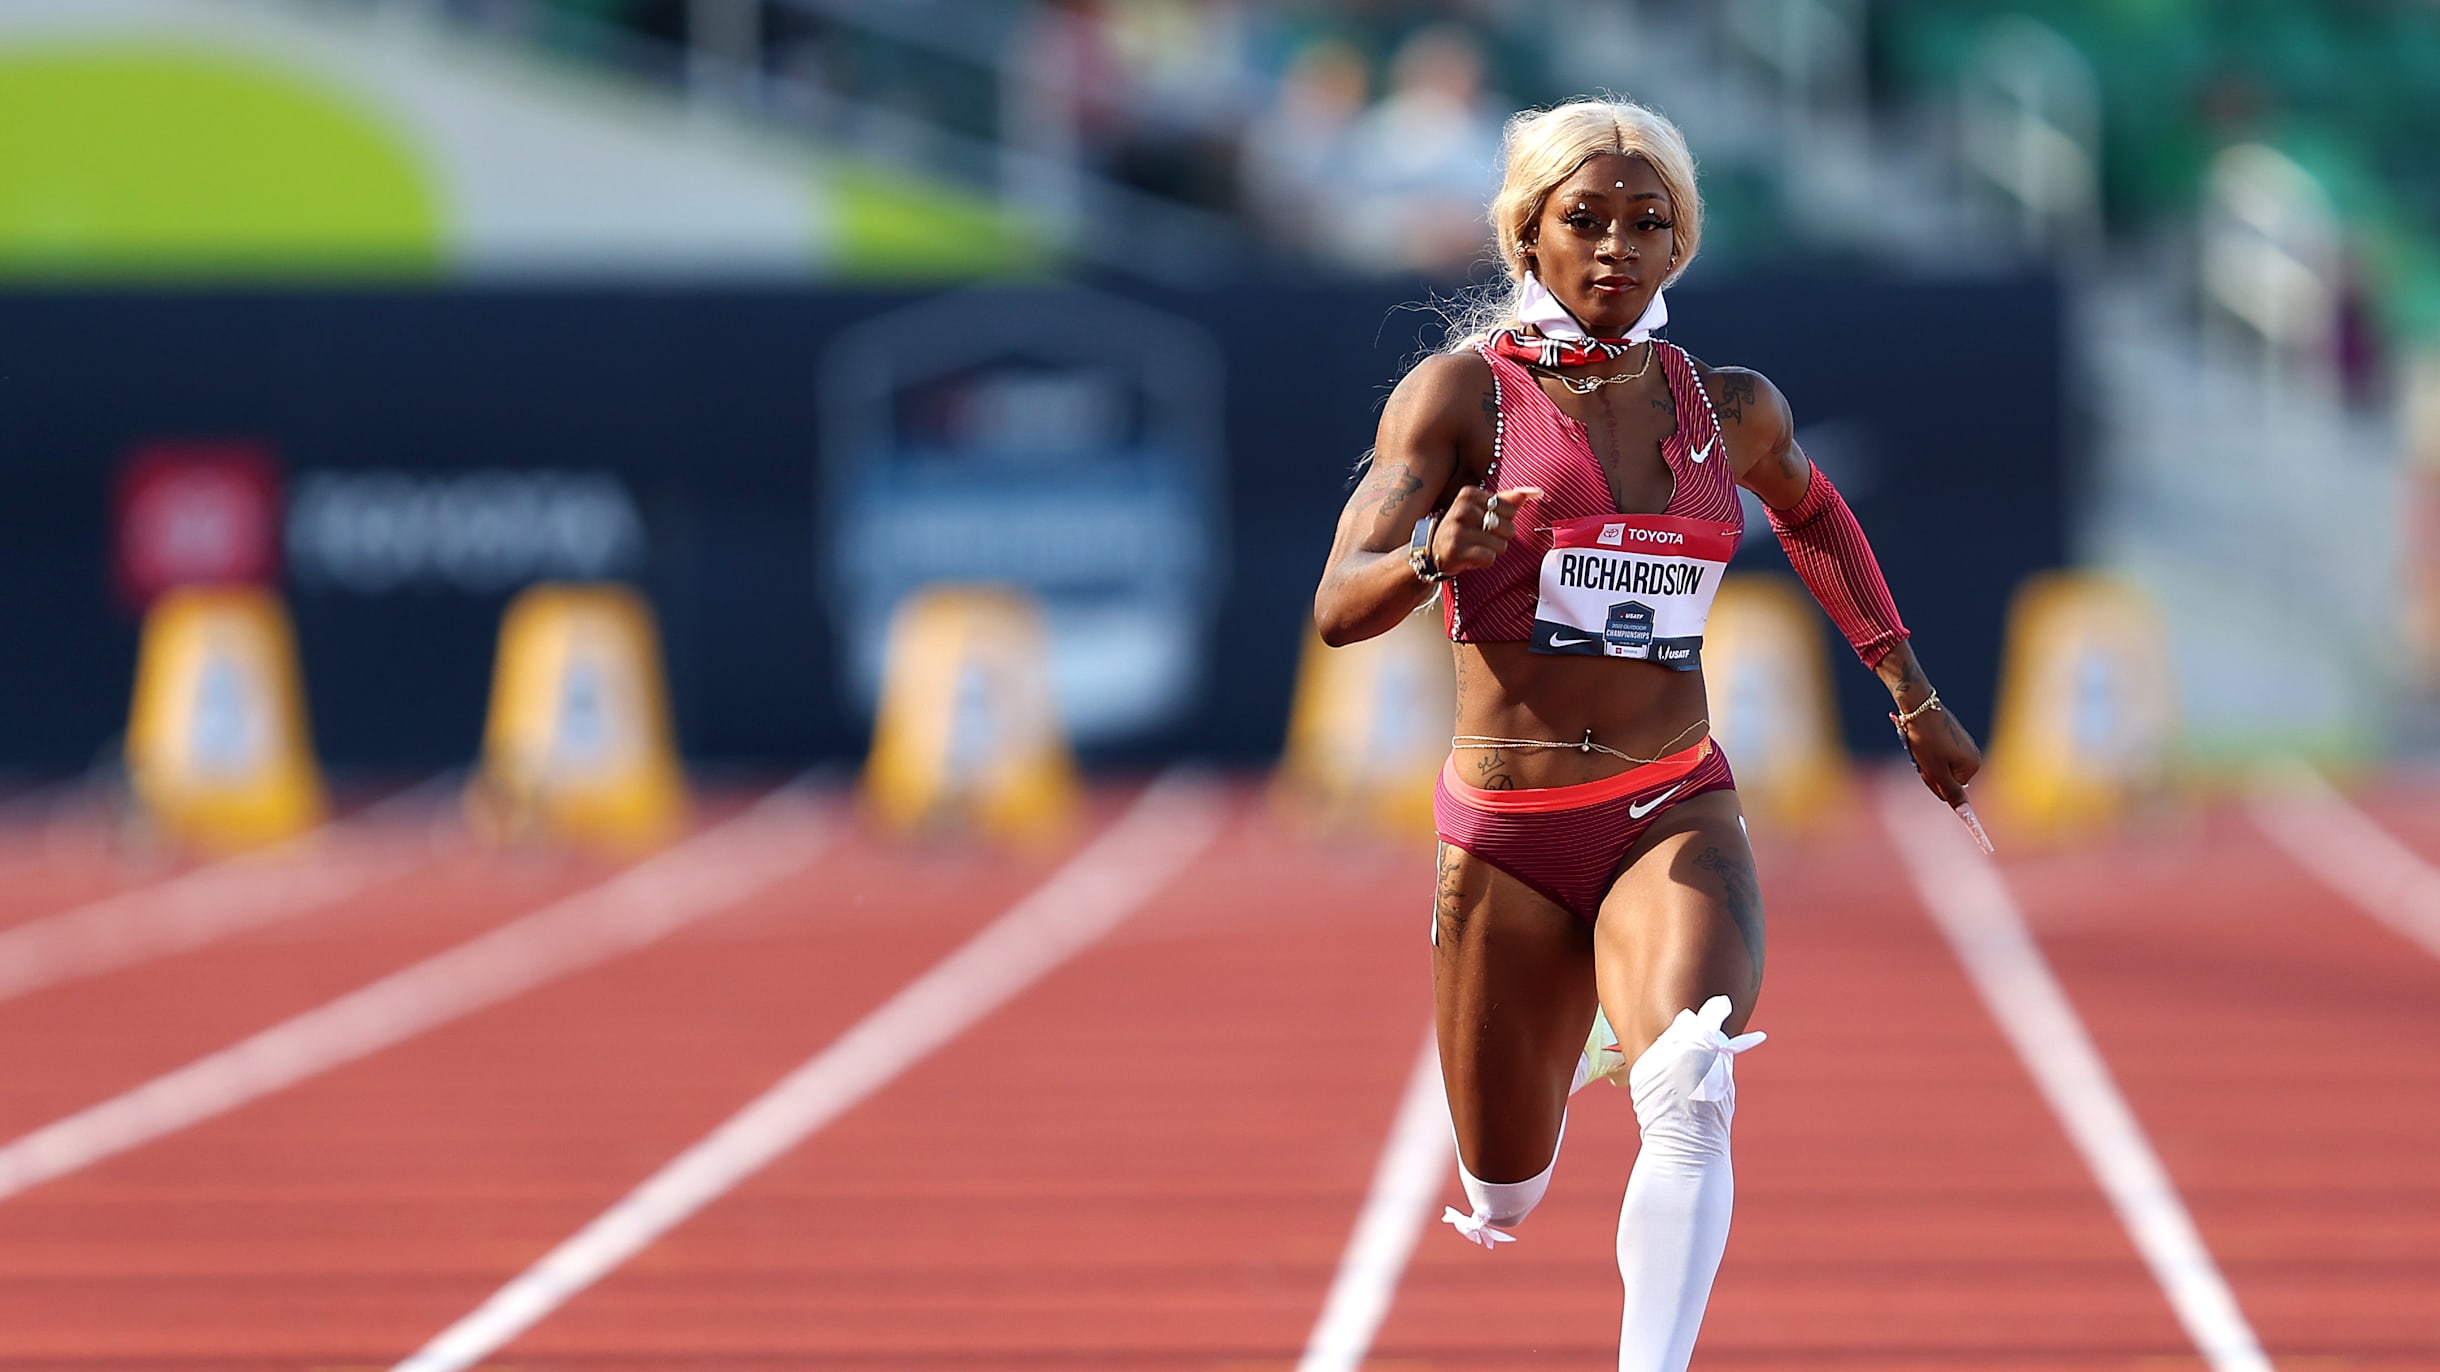 How to watch Sha'Carri Richardson compete at USA Track and Field  Championships 2023 - Women's 100m and 200m World Trials schedule